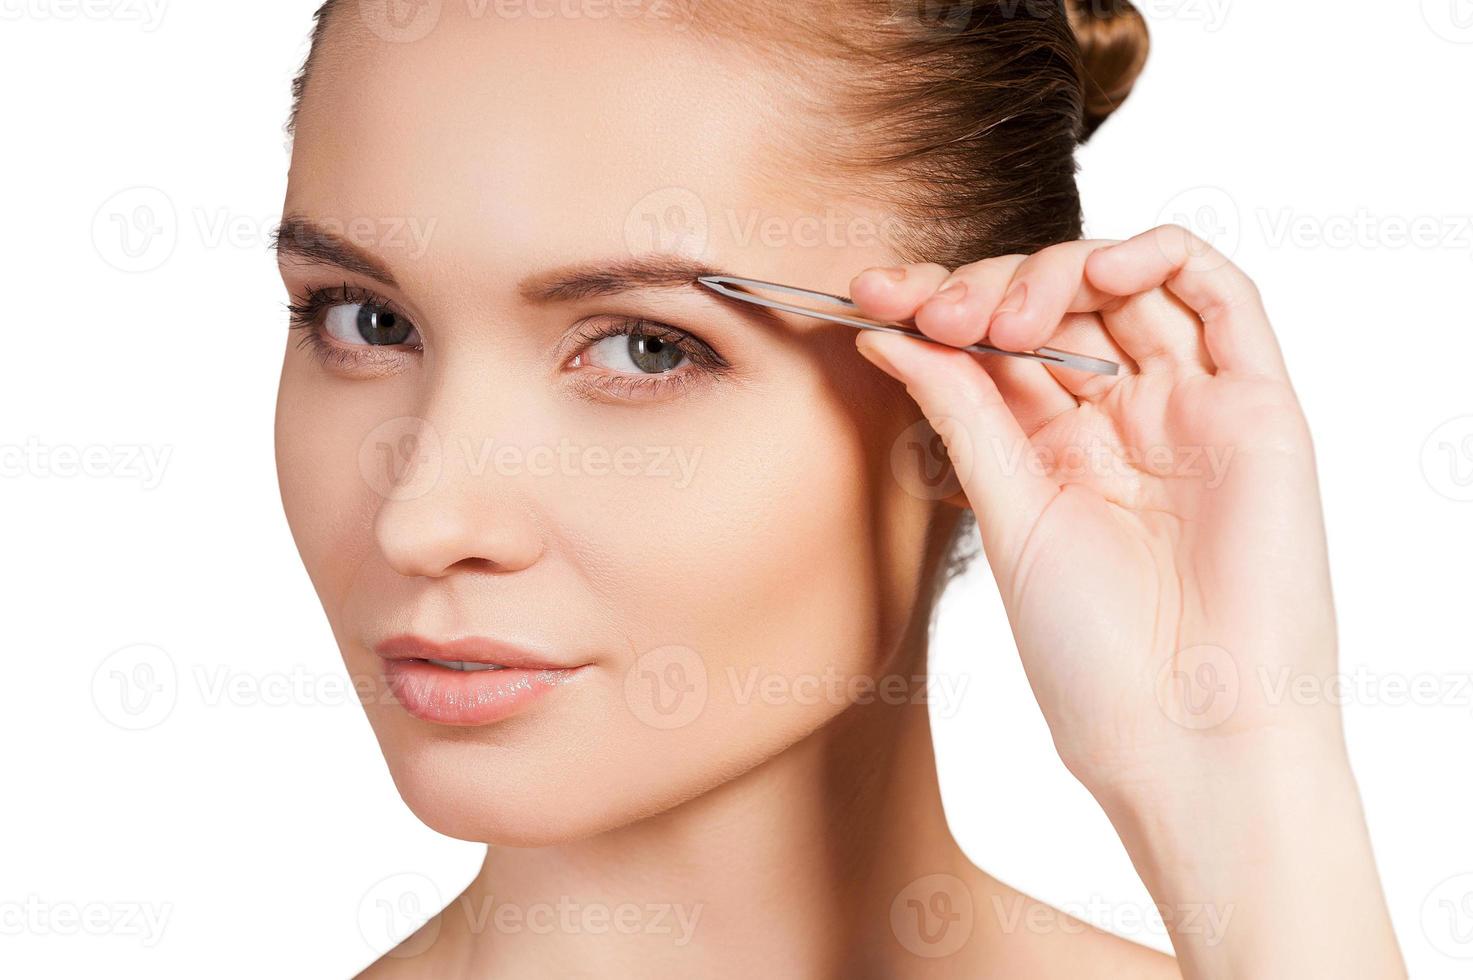 Tweezing her eyebrows. Beautiful young shirtless woman tweezing her eyebrows and looking at camera while standing isolated on white background photo